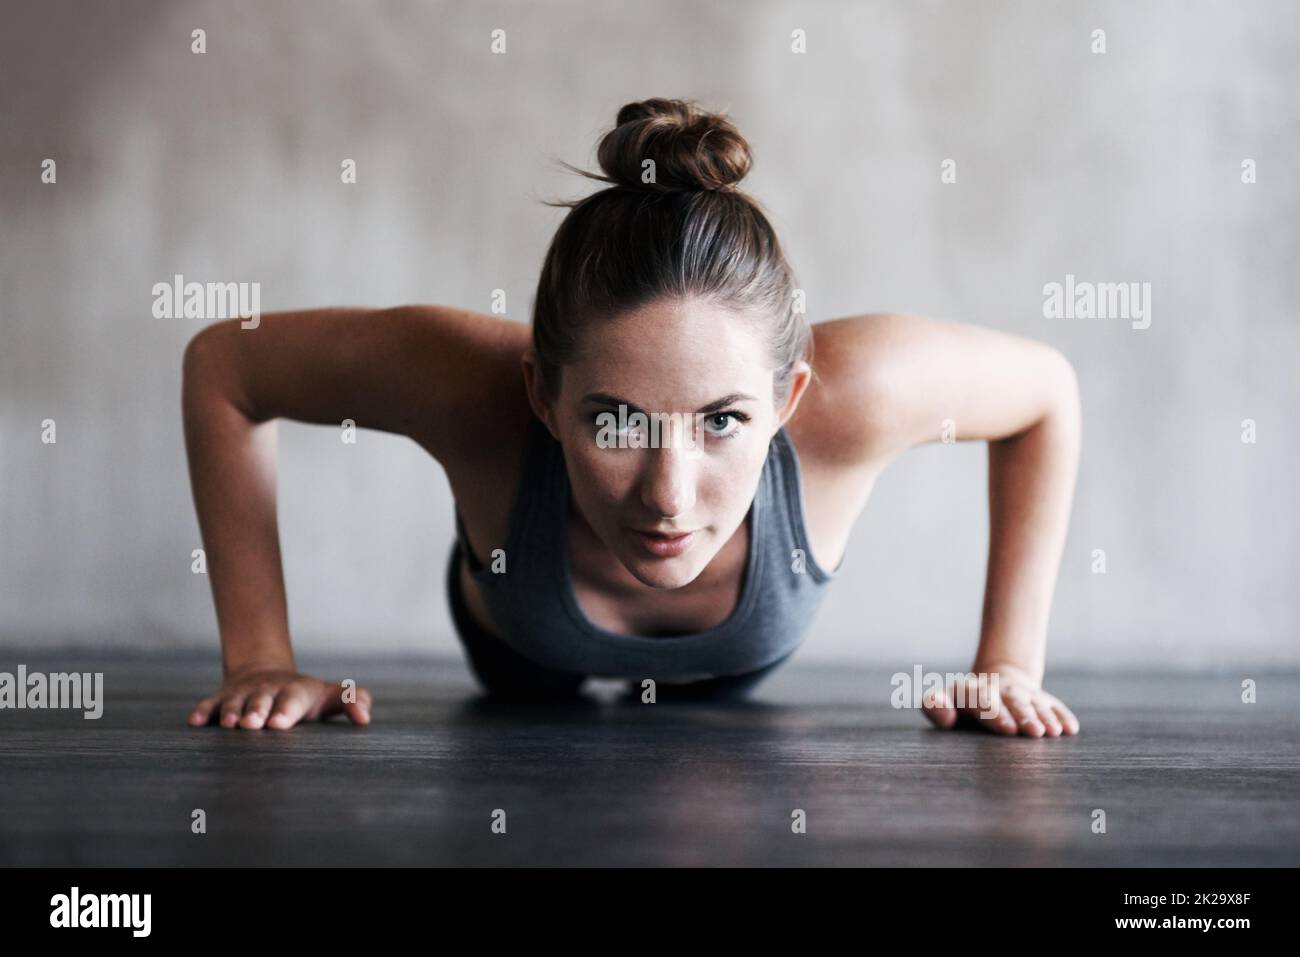 Its tough, but its worth it. Shot of a woman doing pushups at the gym. Stock Photo